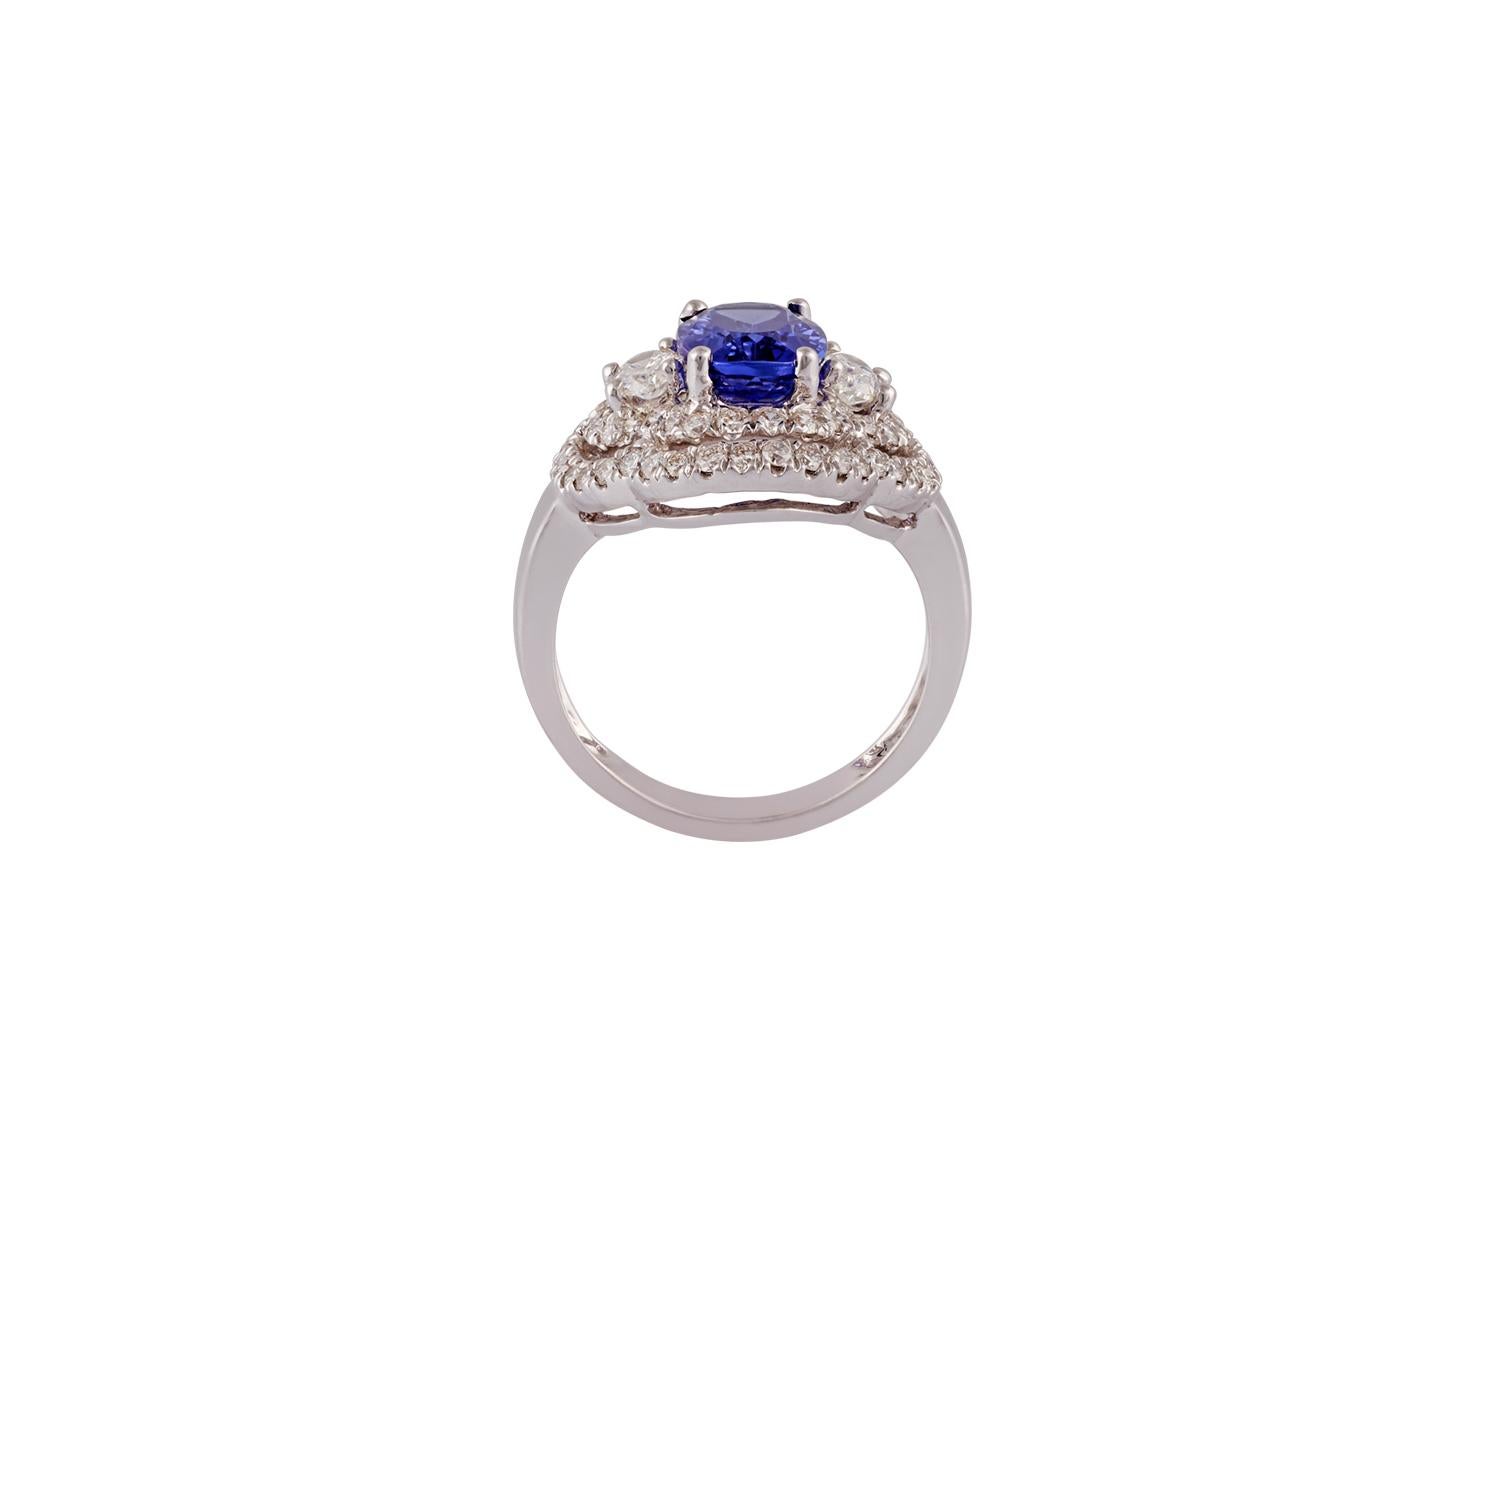 Contemporary 2.91 Carat Tanzanite & Diamond Ring Studded in 18K White Gold For Sale